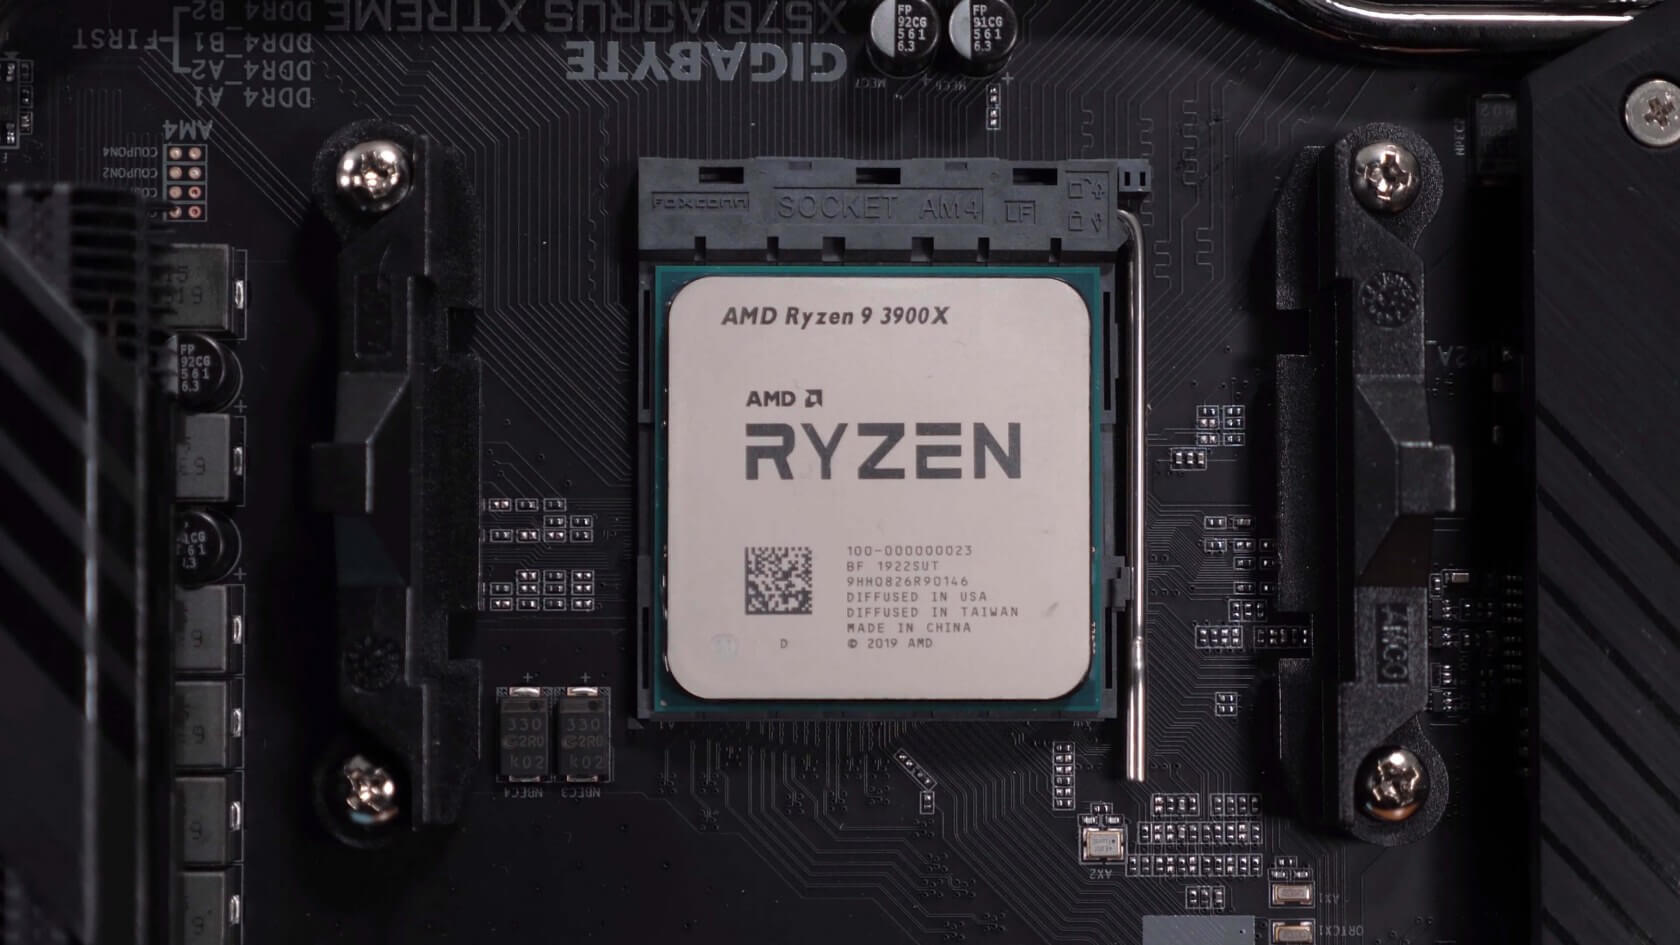 AMD's Ryzen 9 3900X is going for as much as $800 amid supply issues